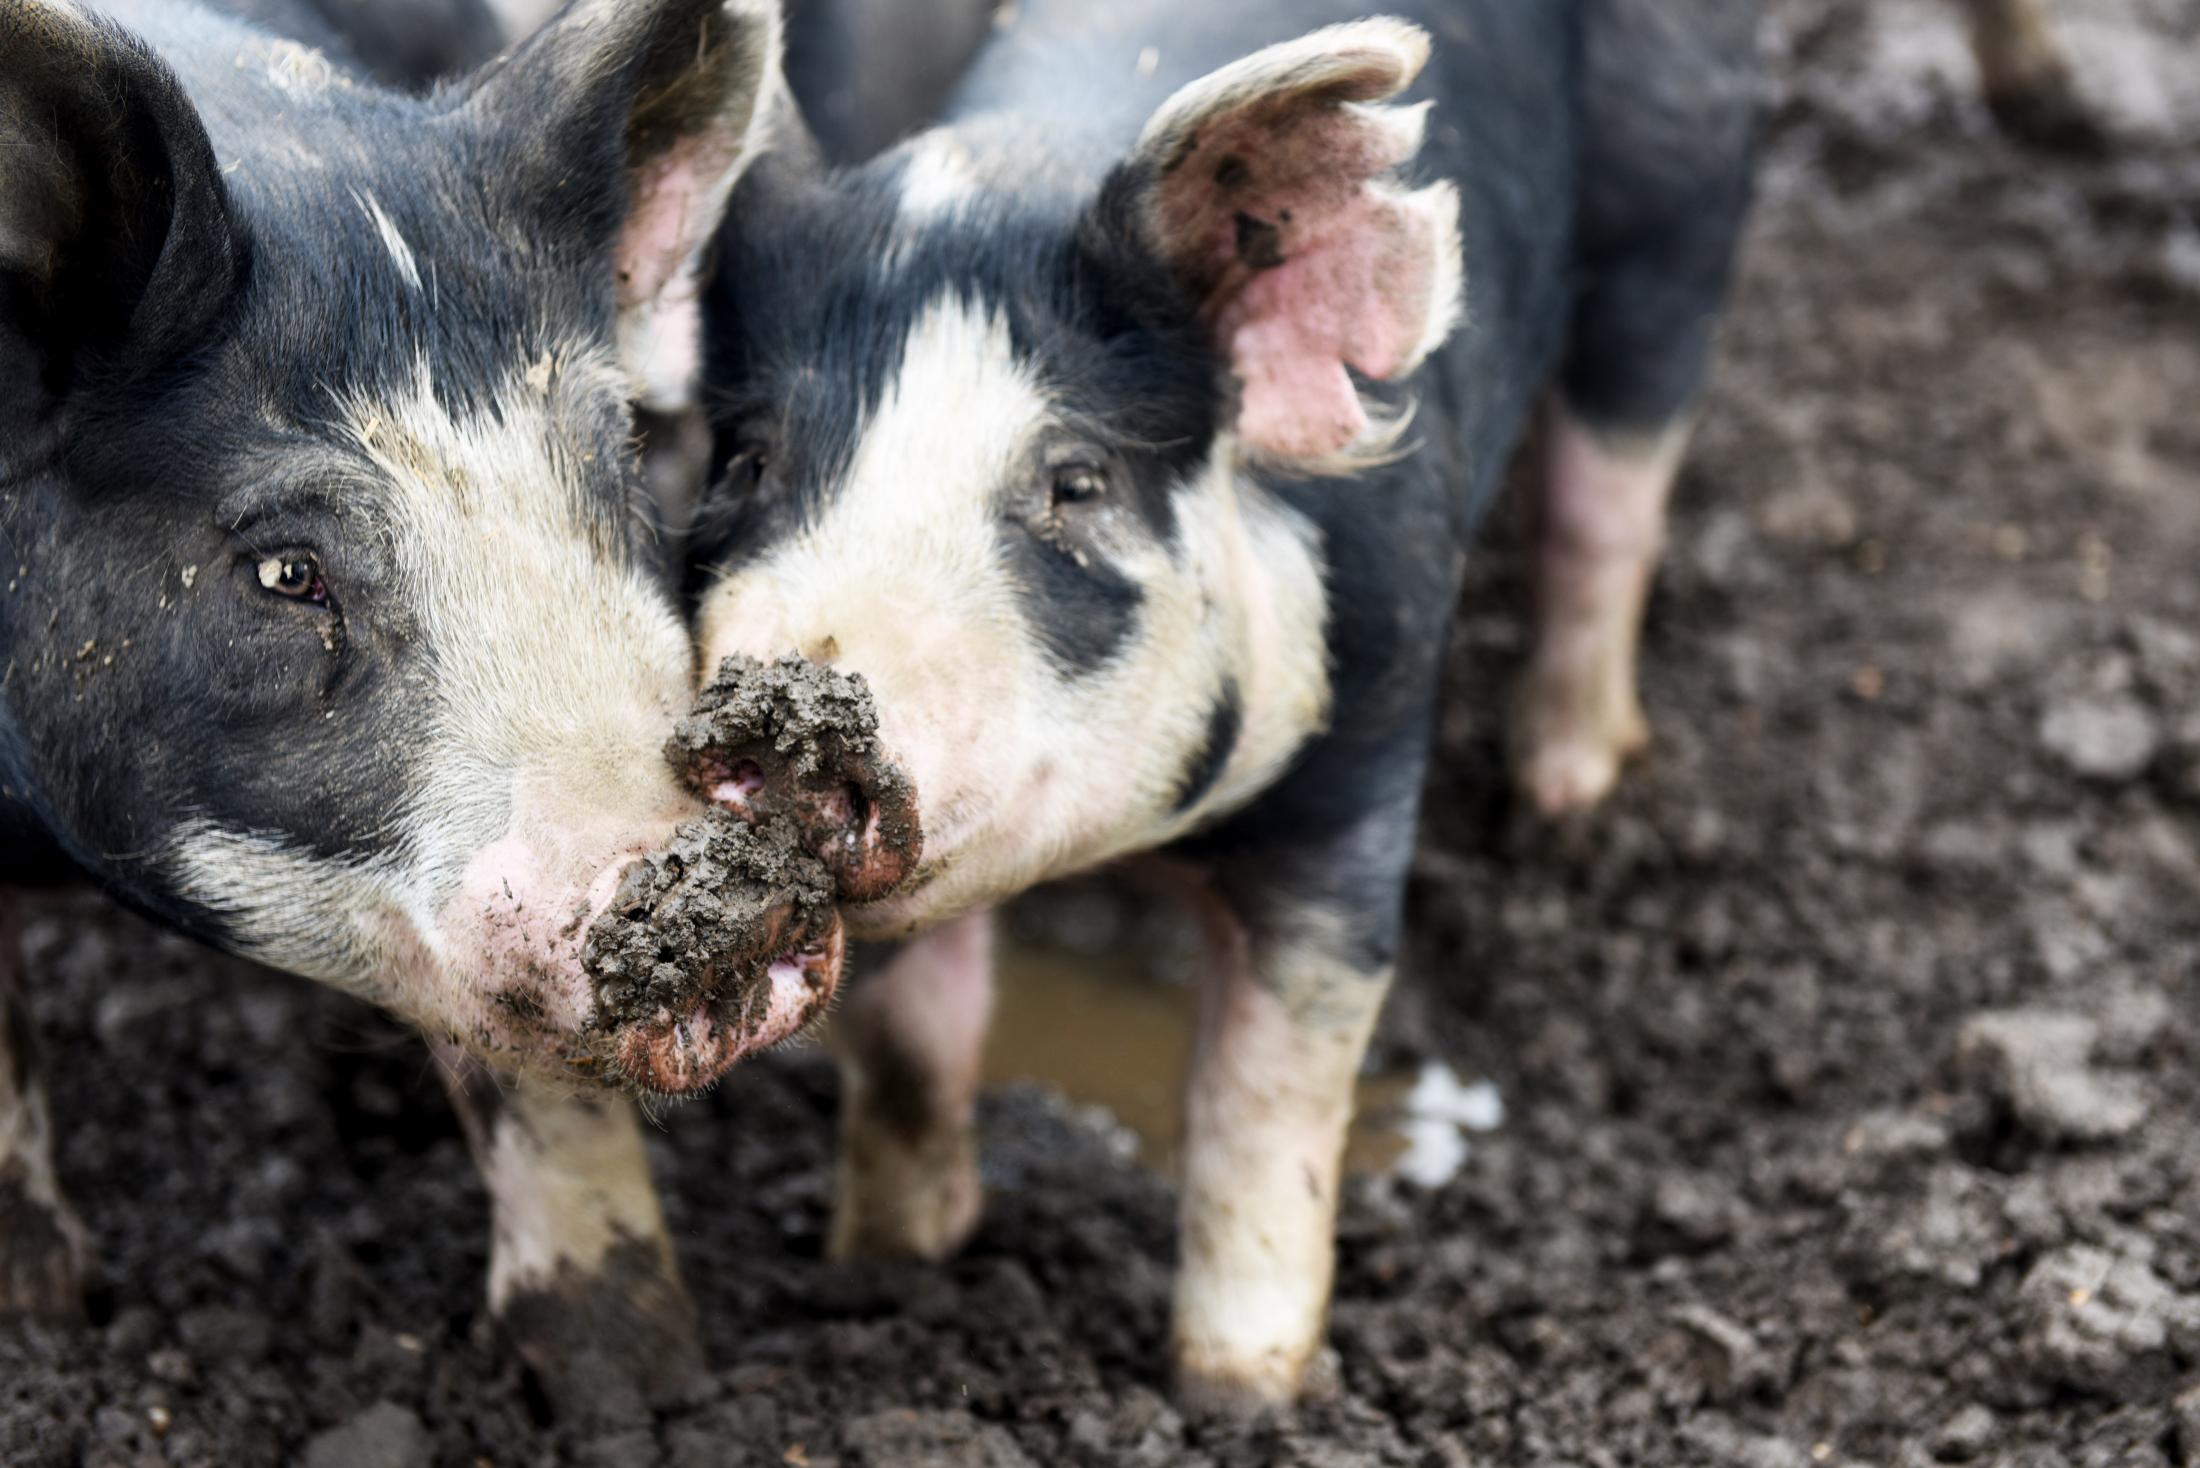 Family Farms Threatened by CAFOS - Hogs from the local community hog farm play in the mud on...